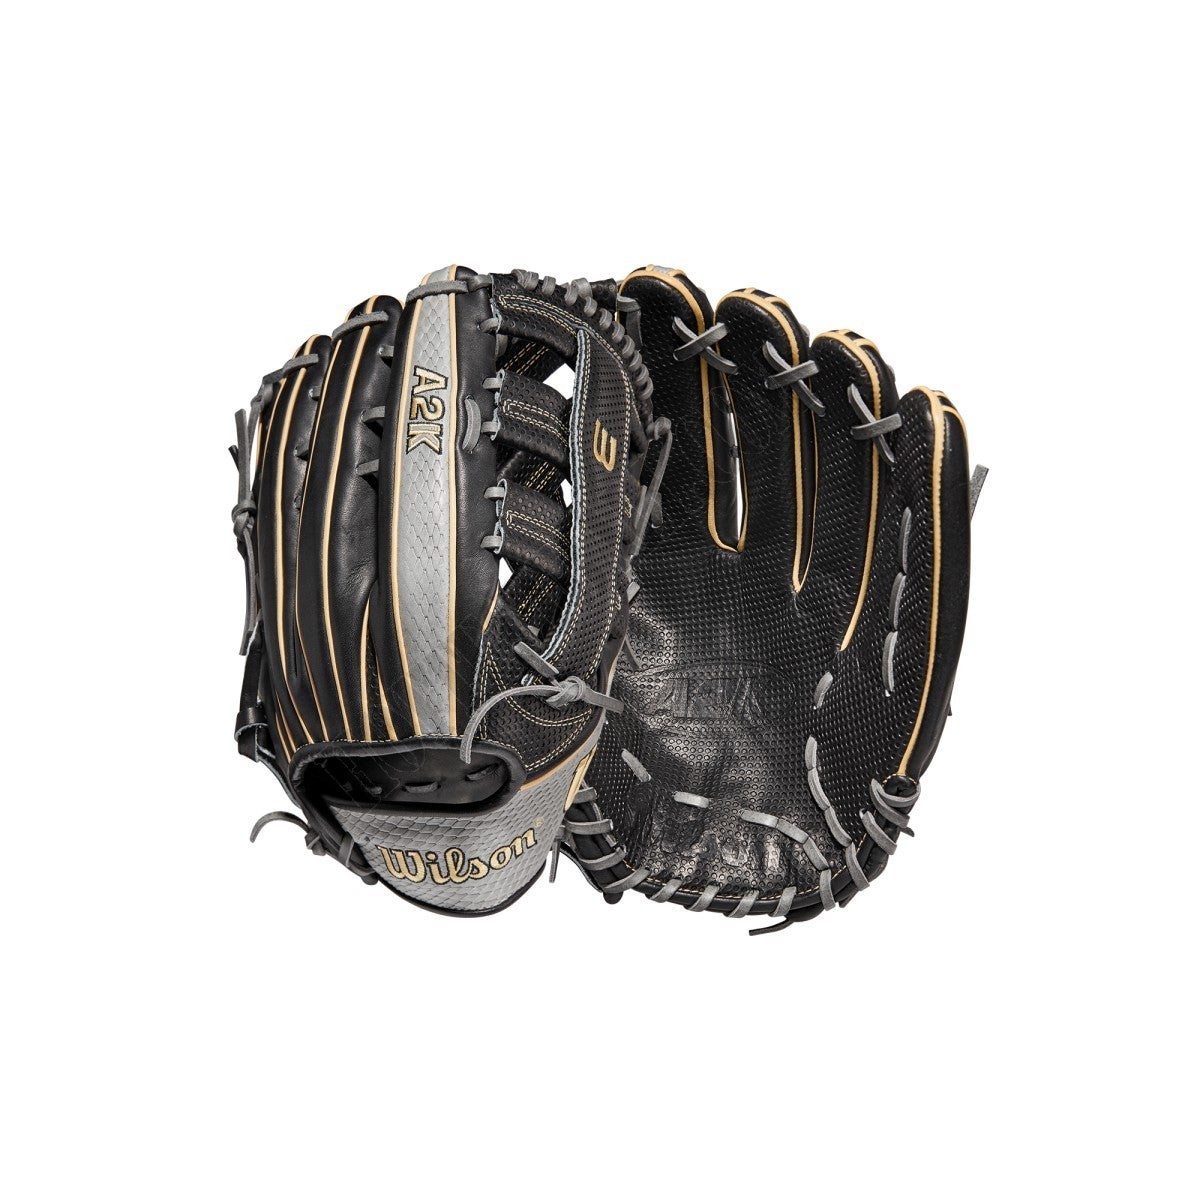 2022 A2K SC1775 12.75" Outfield Baseball Glove ● Wilson Promotions - -0